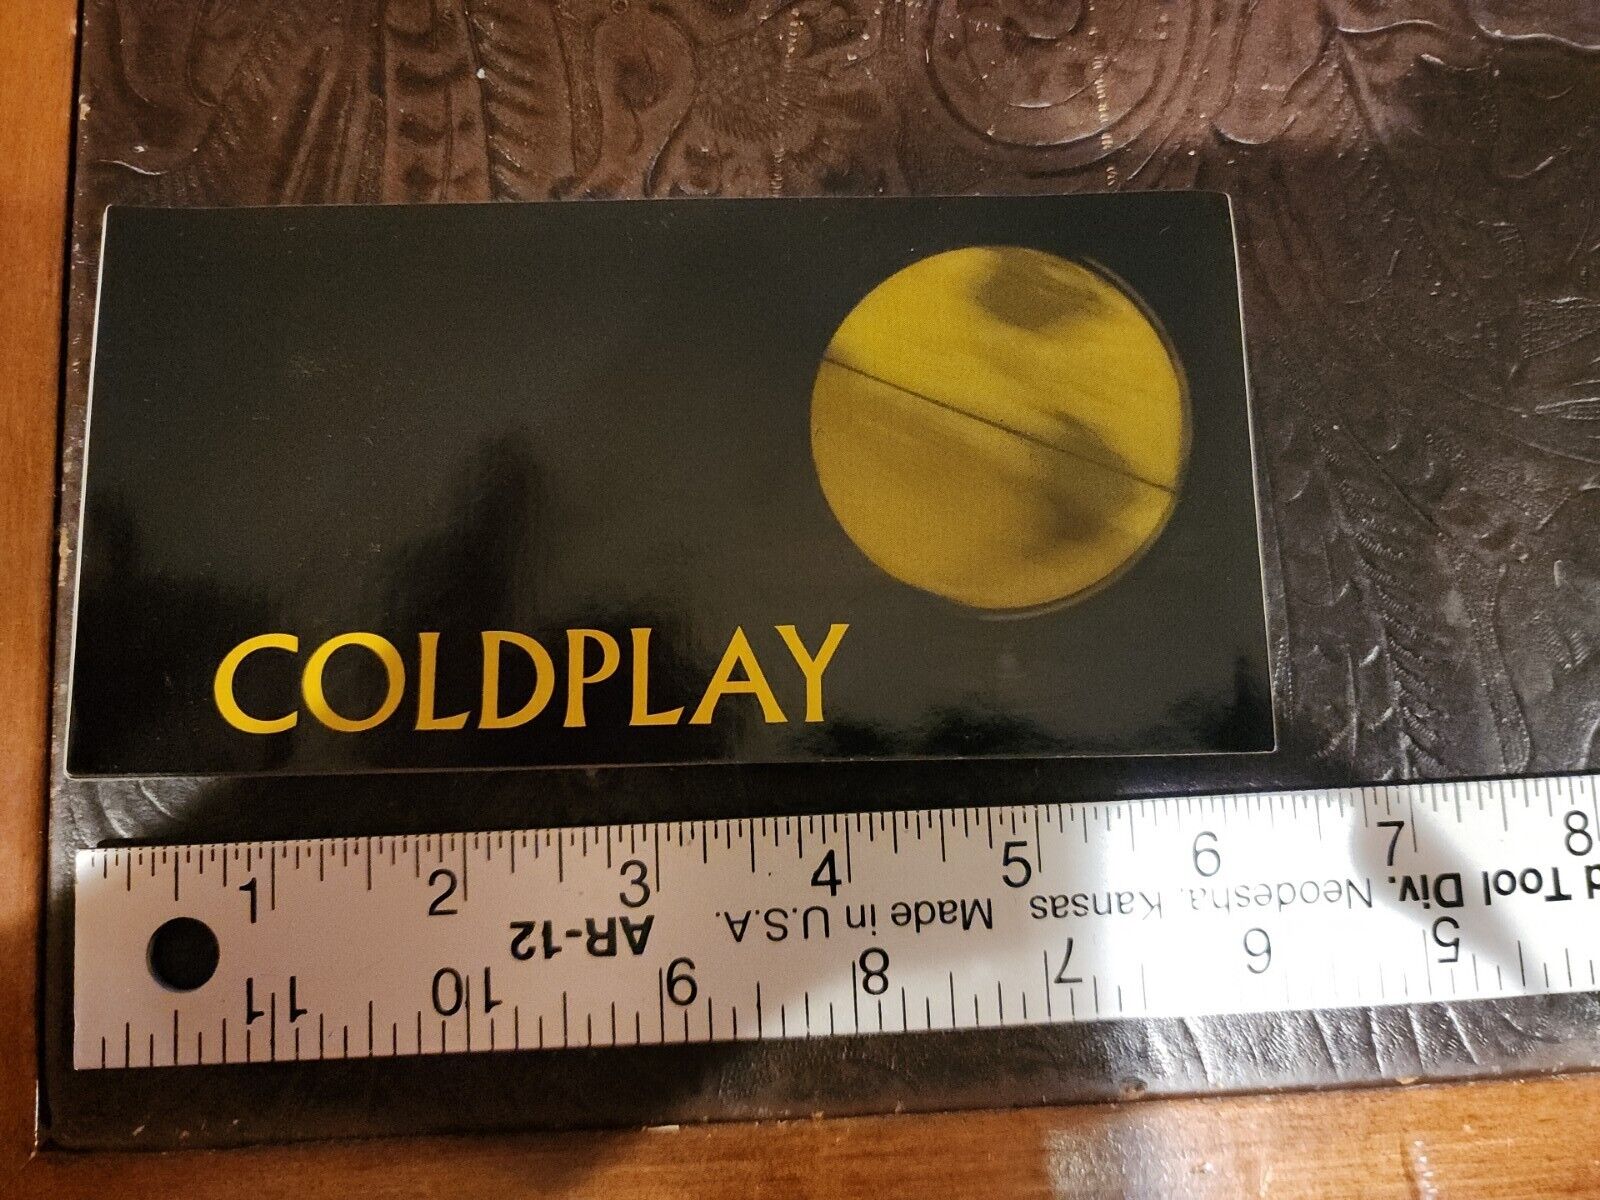 Coldplay Parachute promo STICKER Record Store Only 